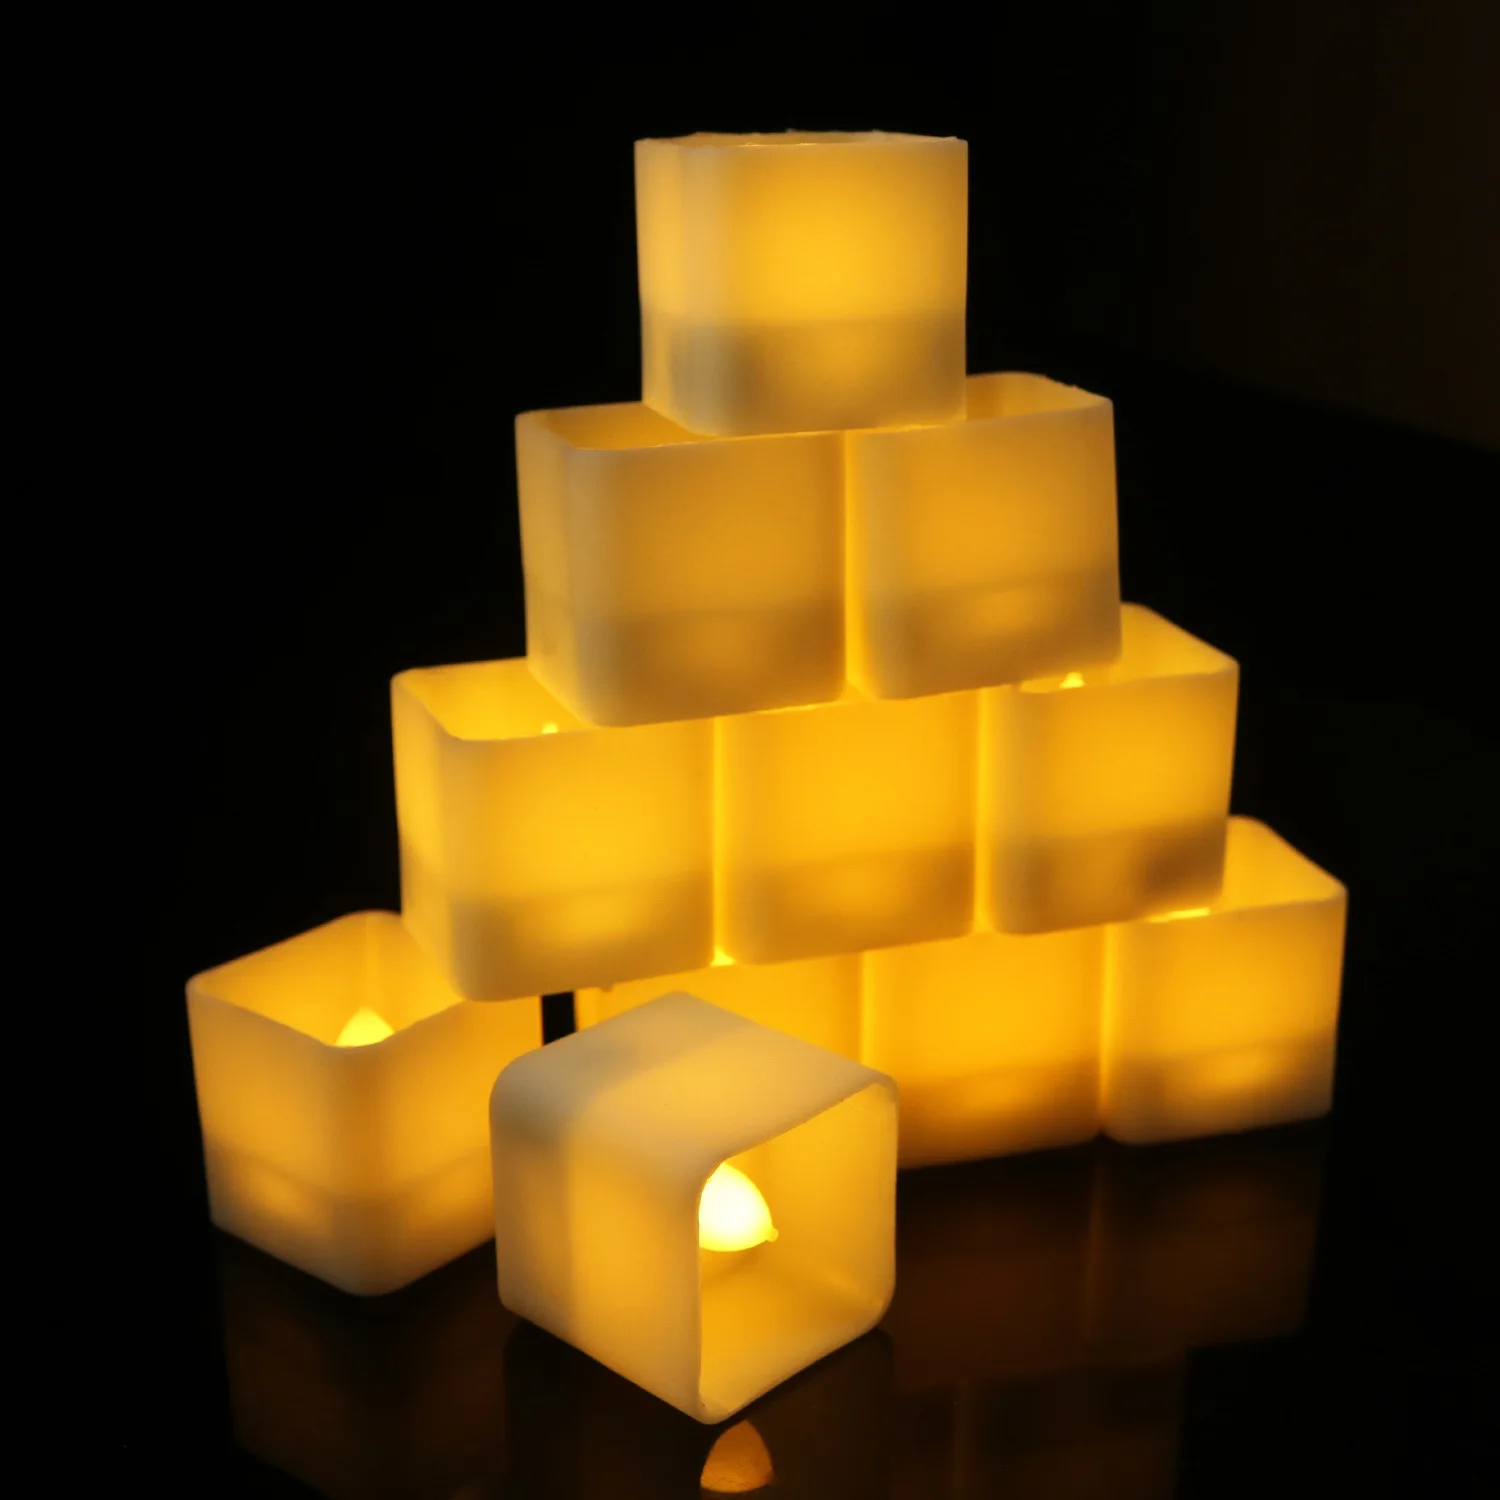 12pcs LED Square Electronic Tea Lights Candles Flameless Tea Lights For Outdoor Garden Christmas Wedding Party Decoration